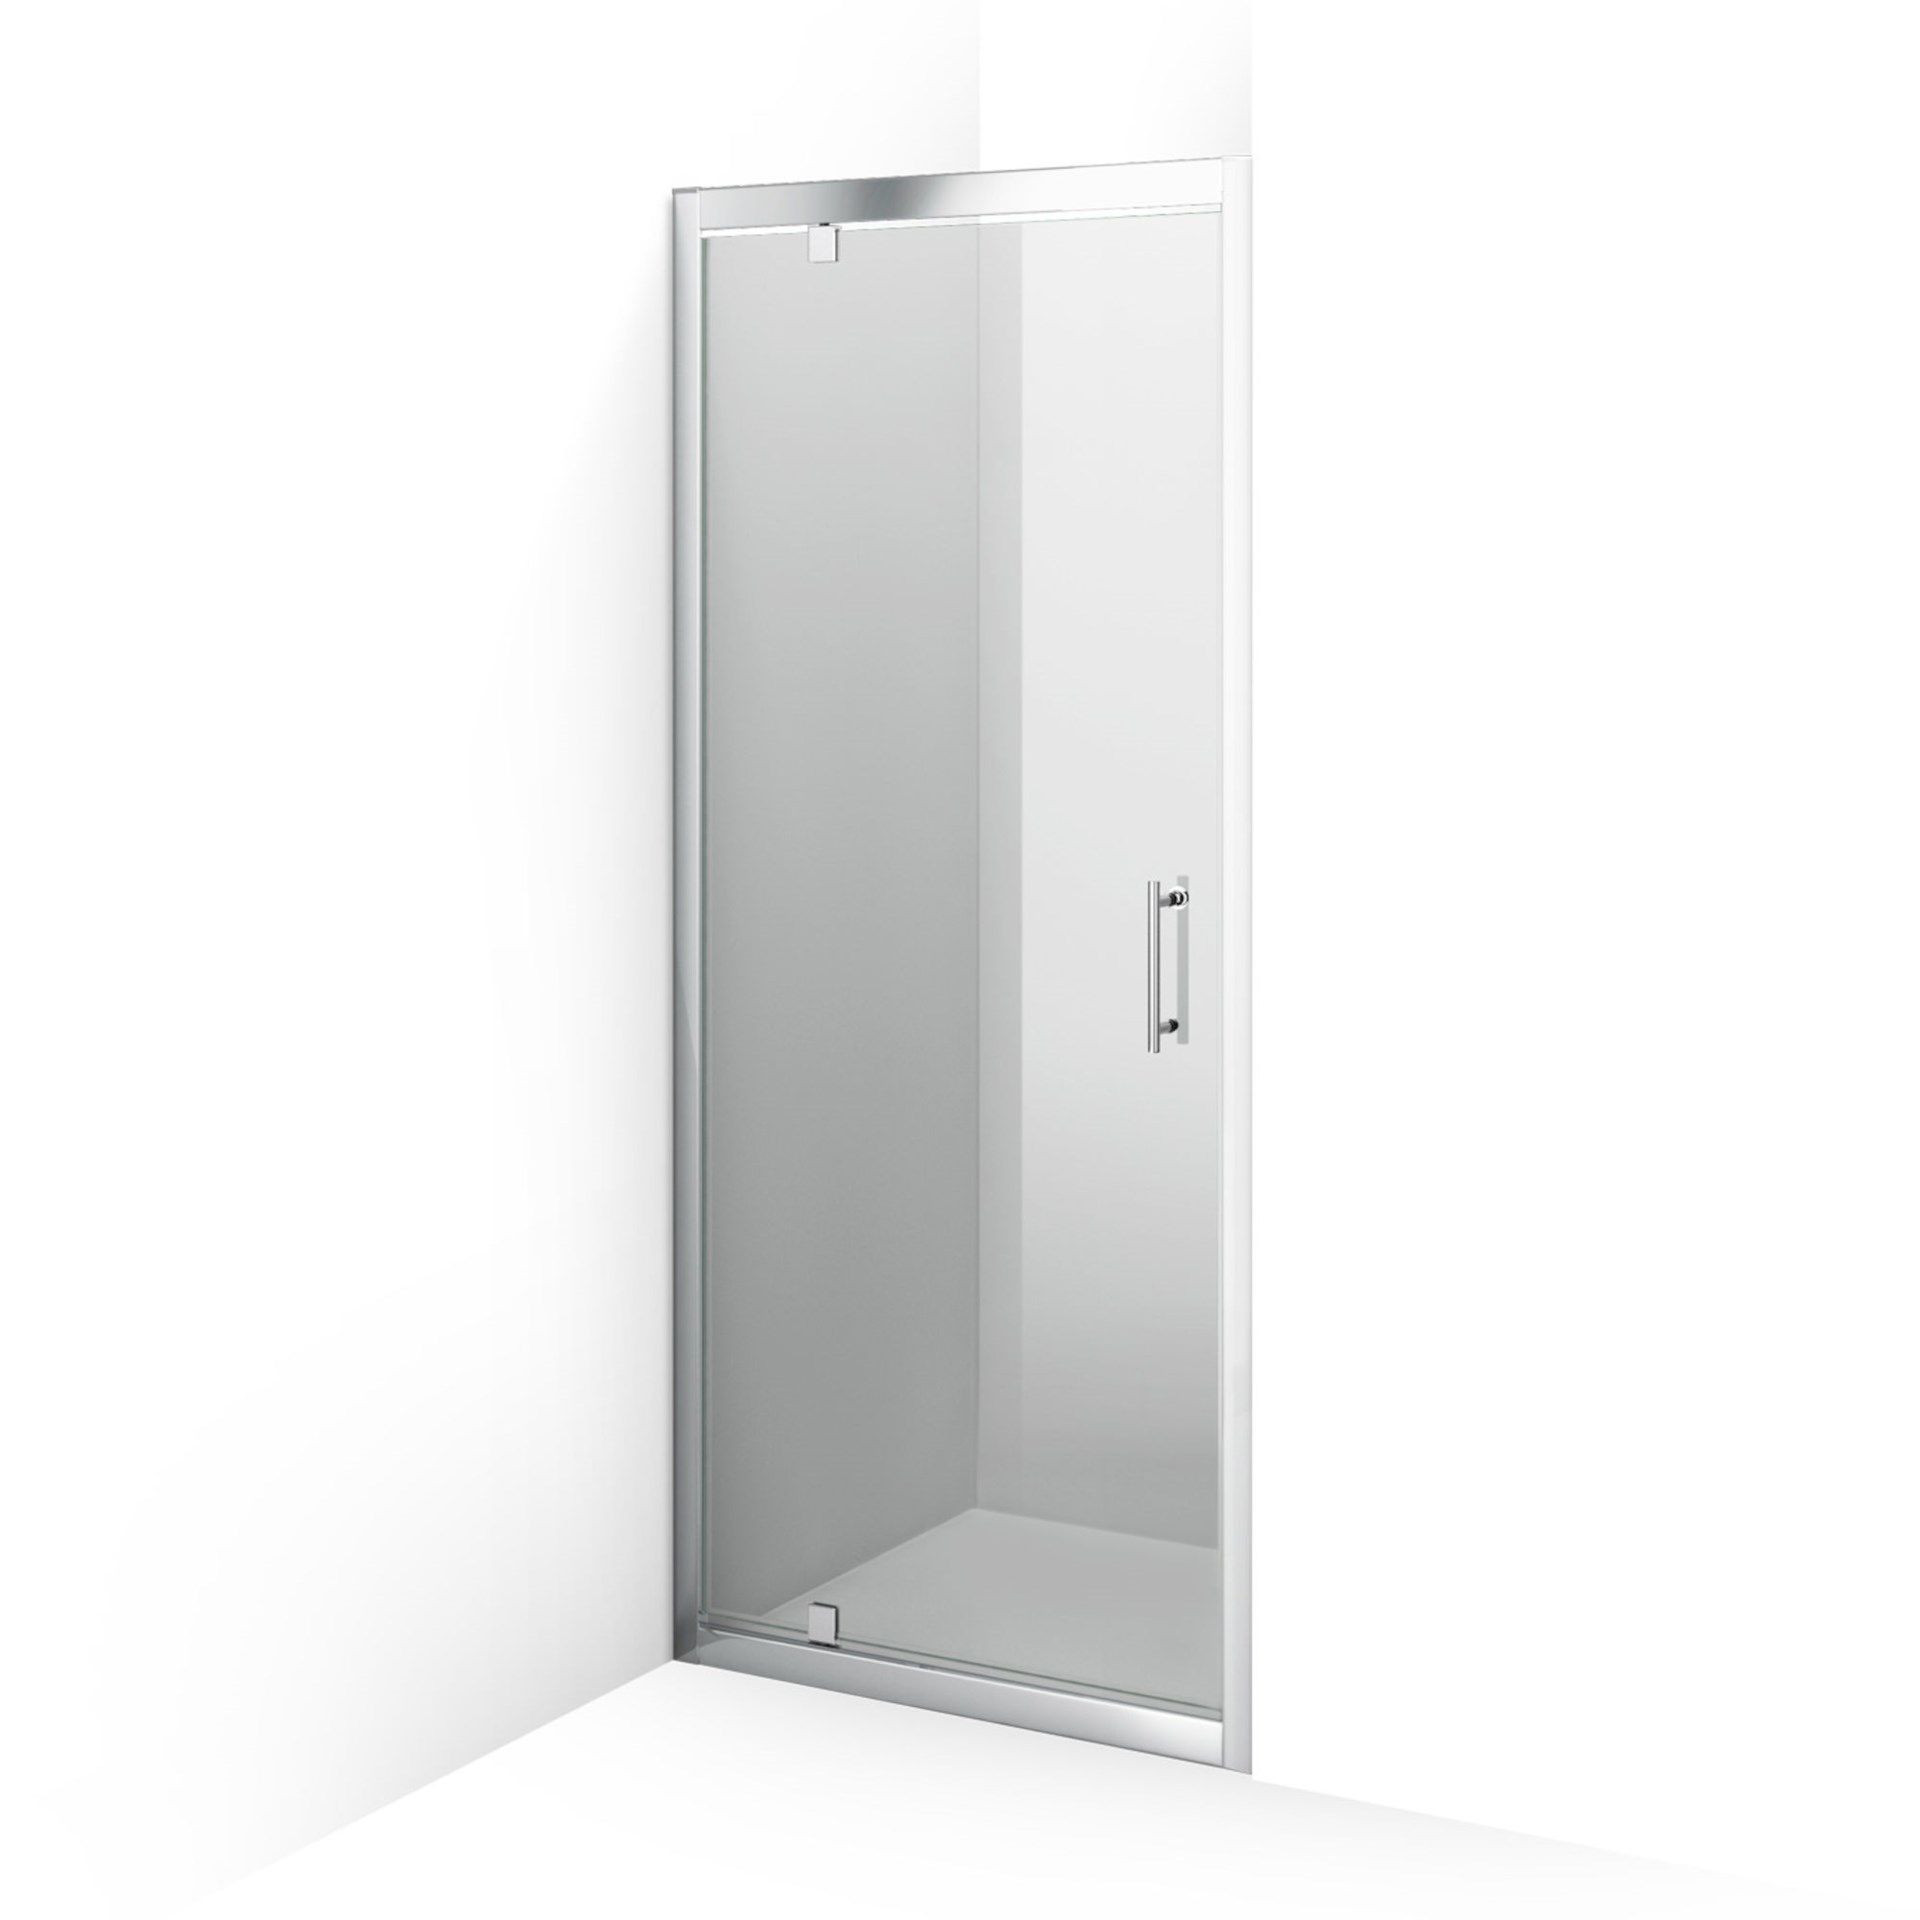 Twyfords 700mm - 6mm - Premium Pivot Shower Door. RRP £299.99.8mm Safety Glass Fully waterproo... - Image 2 of 3